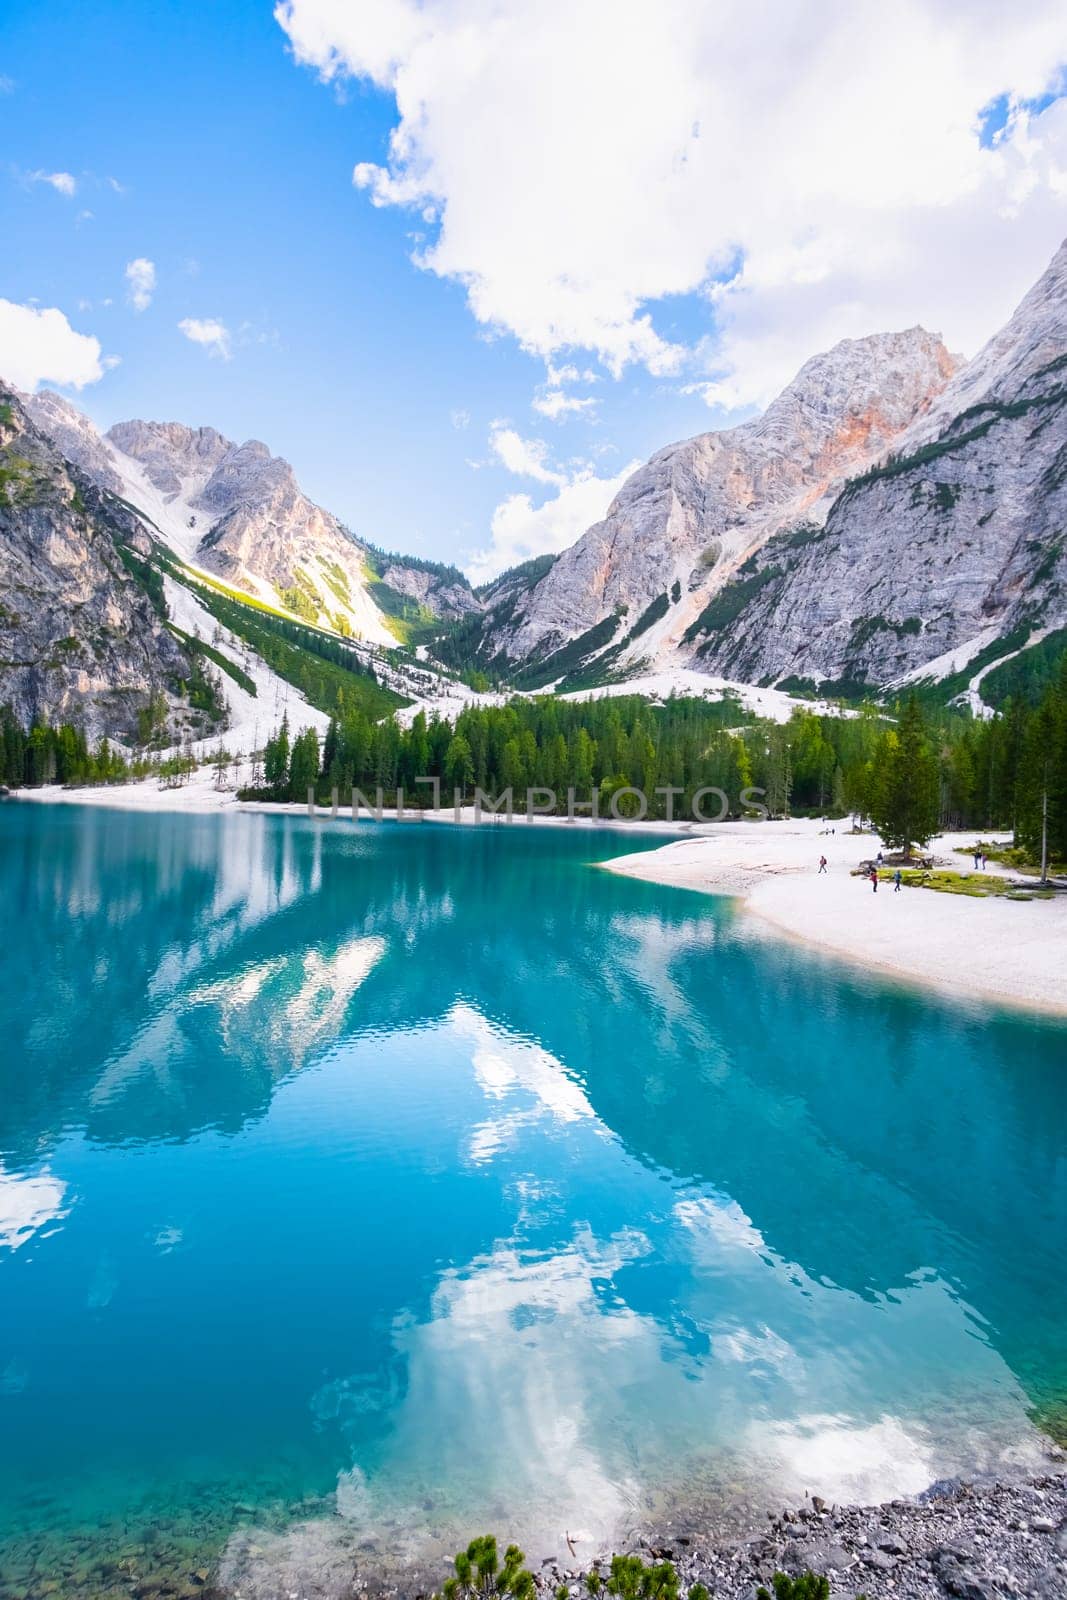 A vertical shoot of a cinematographic view of the beautiful landscape of Lake Braies with turquoise water and high Dolomites mountains